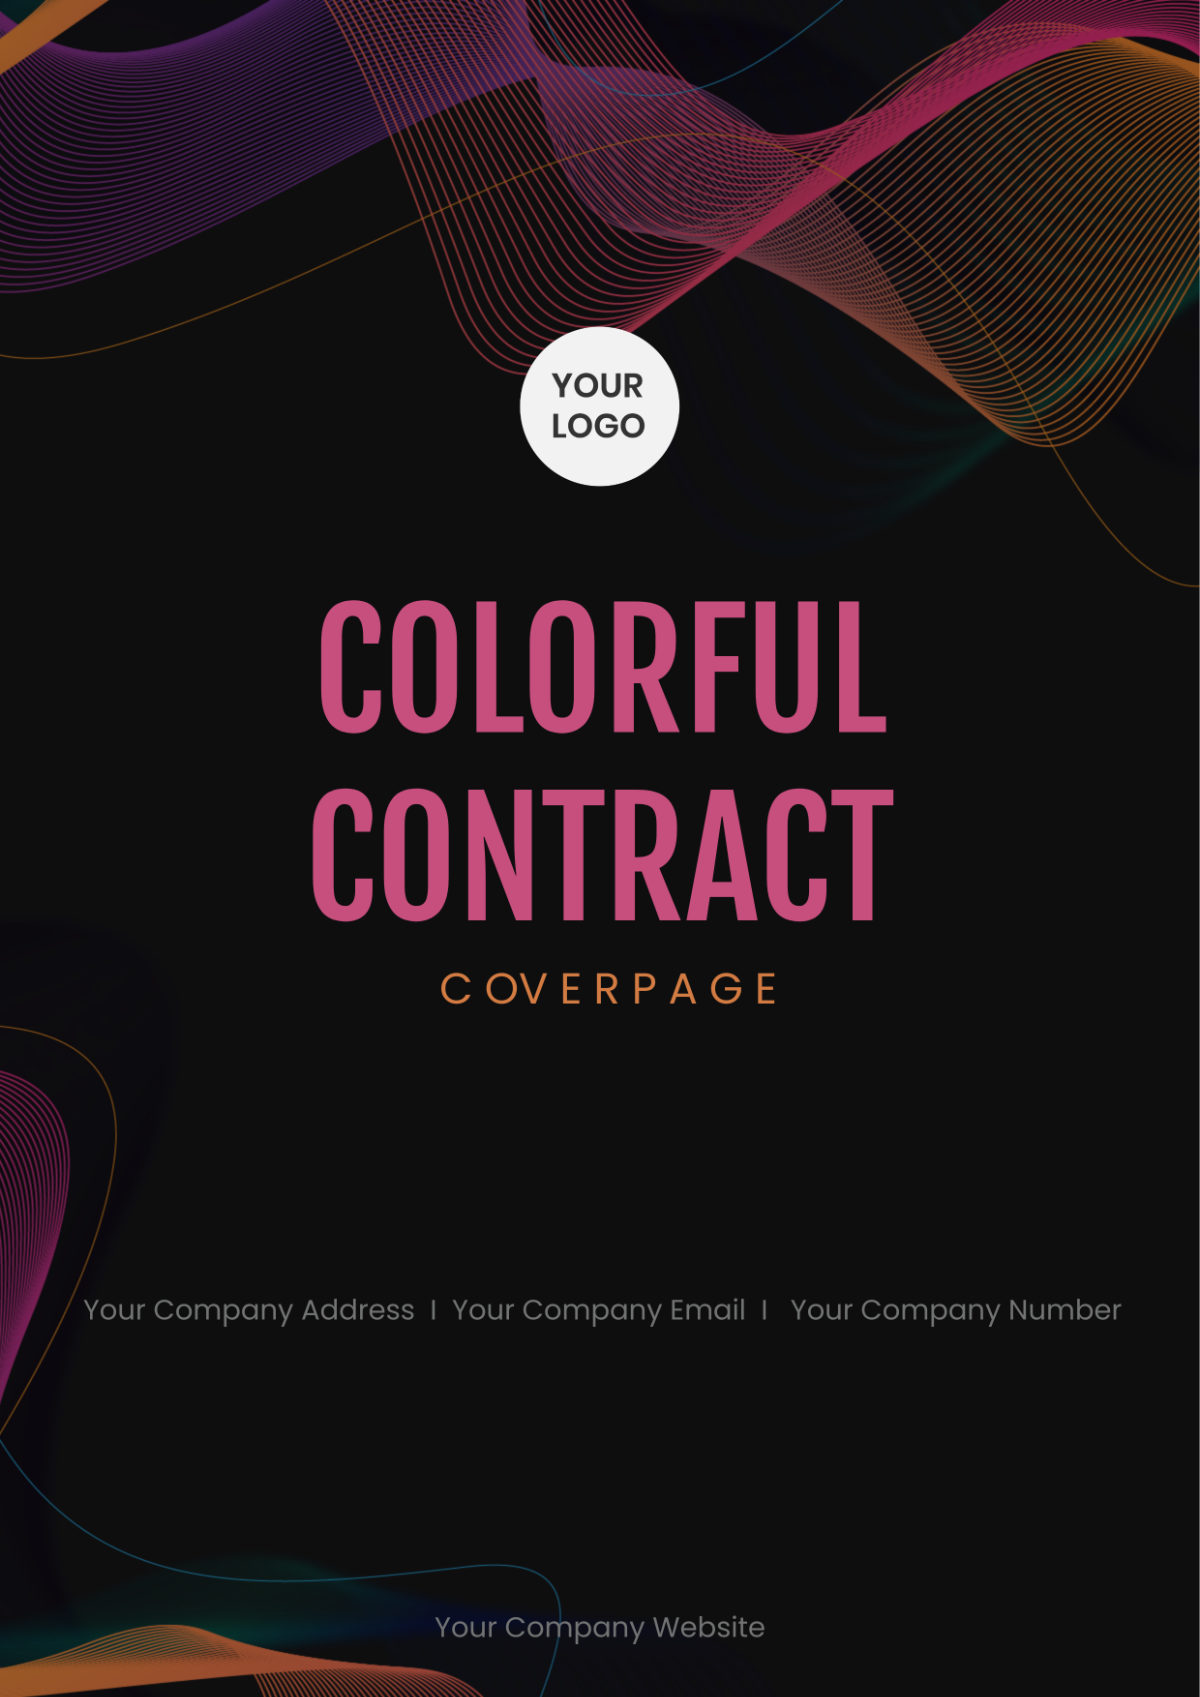 Colorful Contract Cover Page